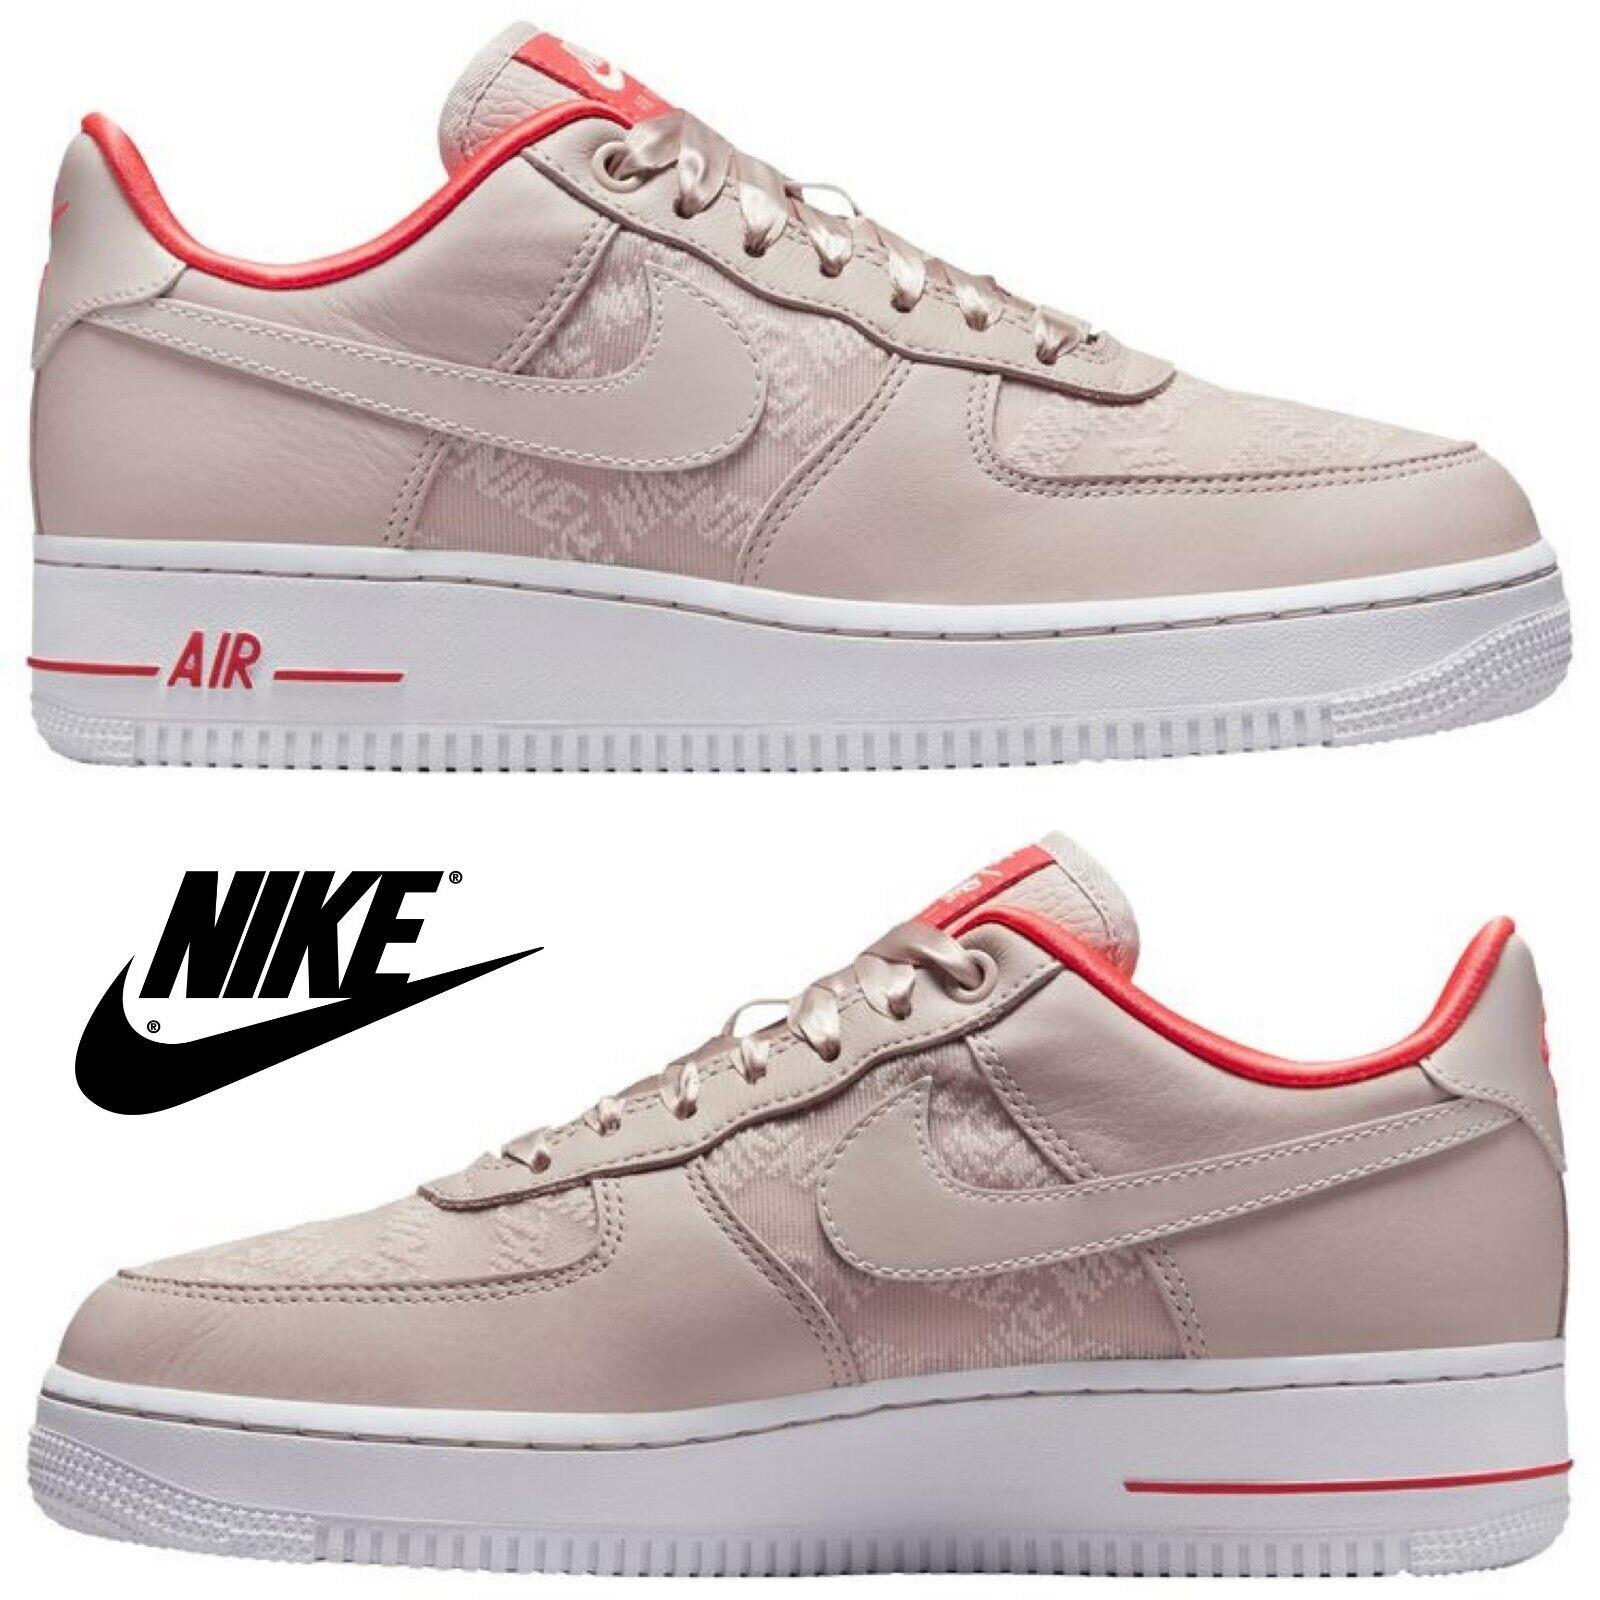 Nike Air Force 1 `07 Casual Shoes Women`s Sneakers Walking Sport White